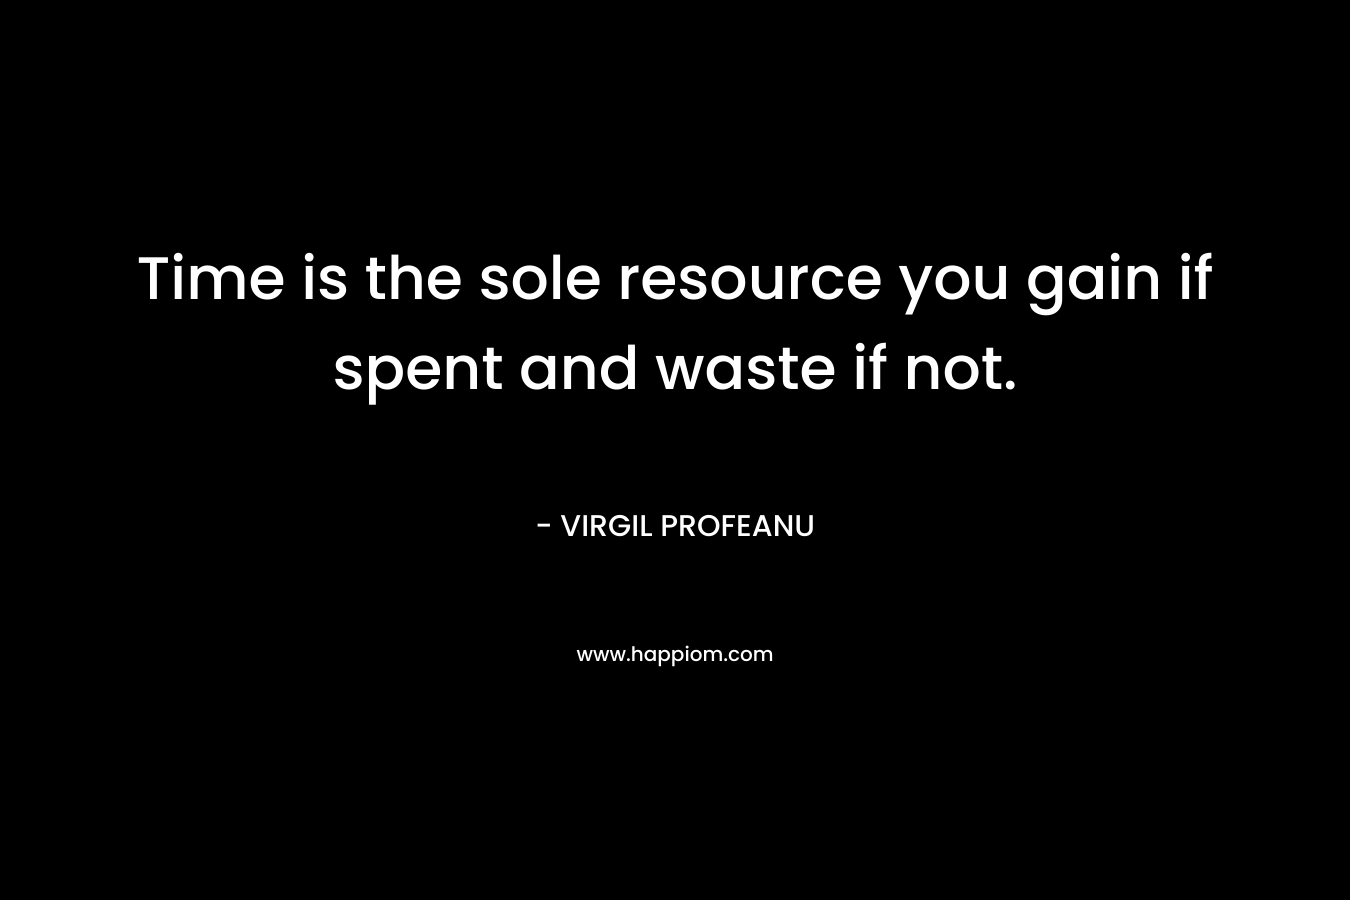 Time is the sole resource you gain if spent and waste if not.